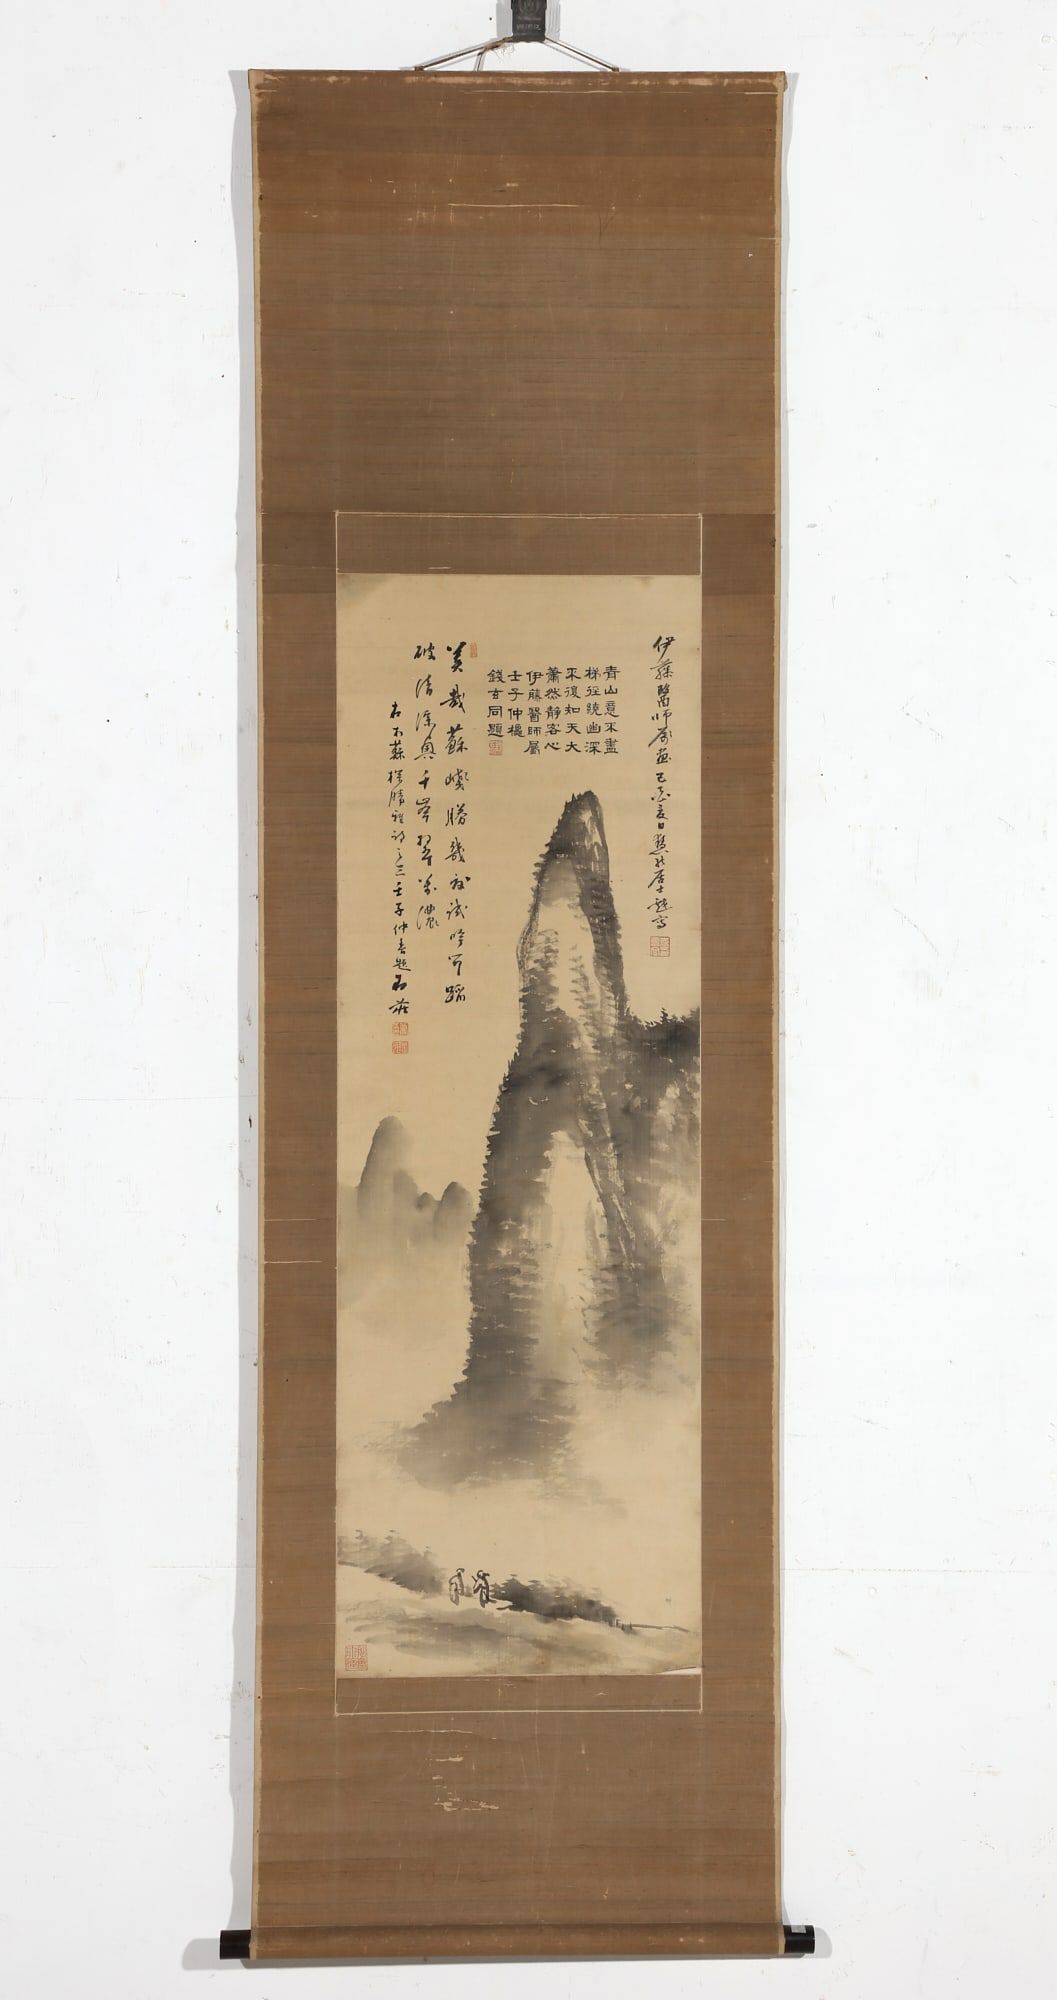 A CHINESE LANDSCAPE SCROLL WITH